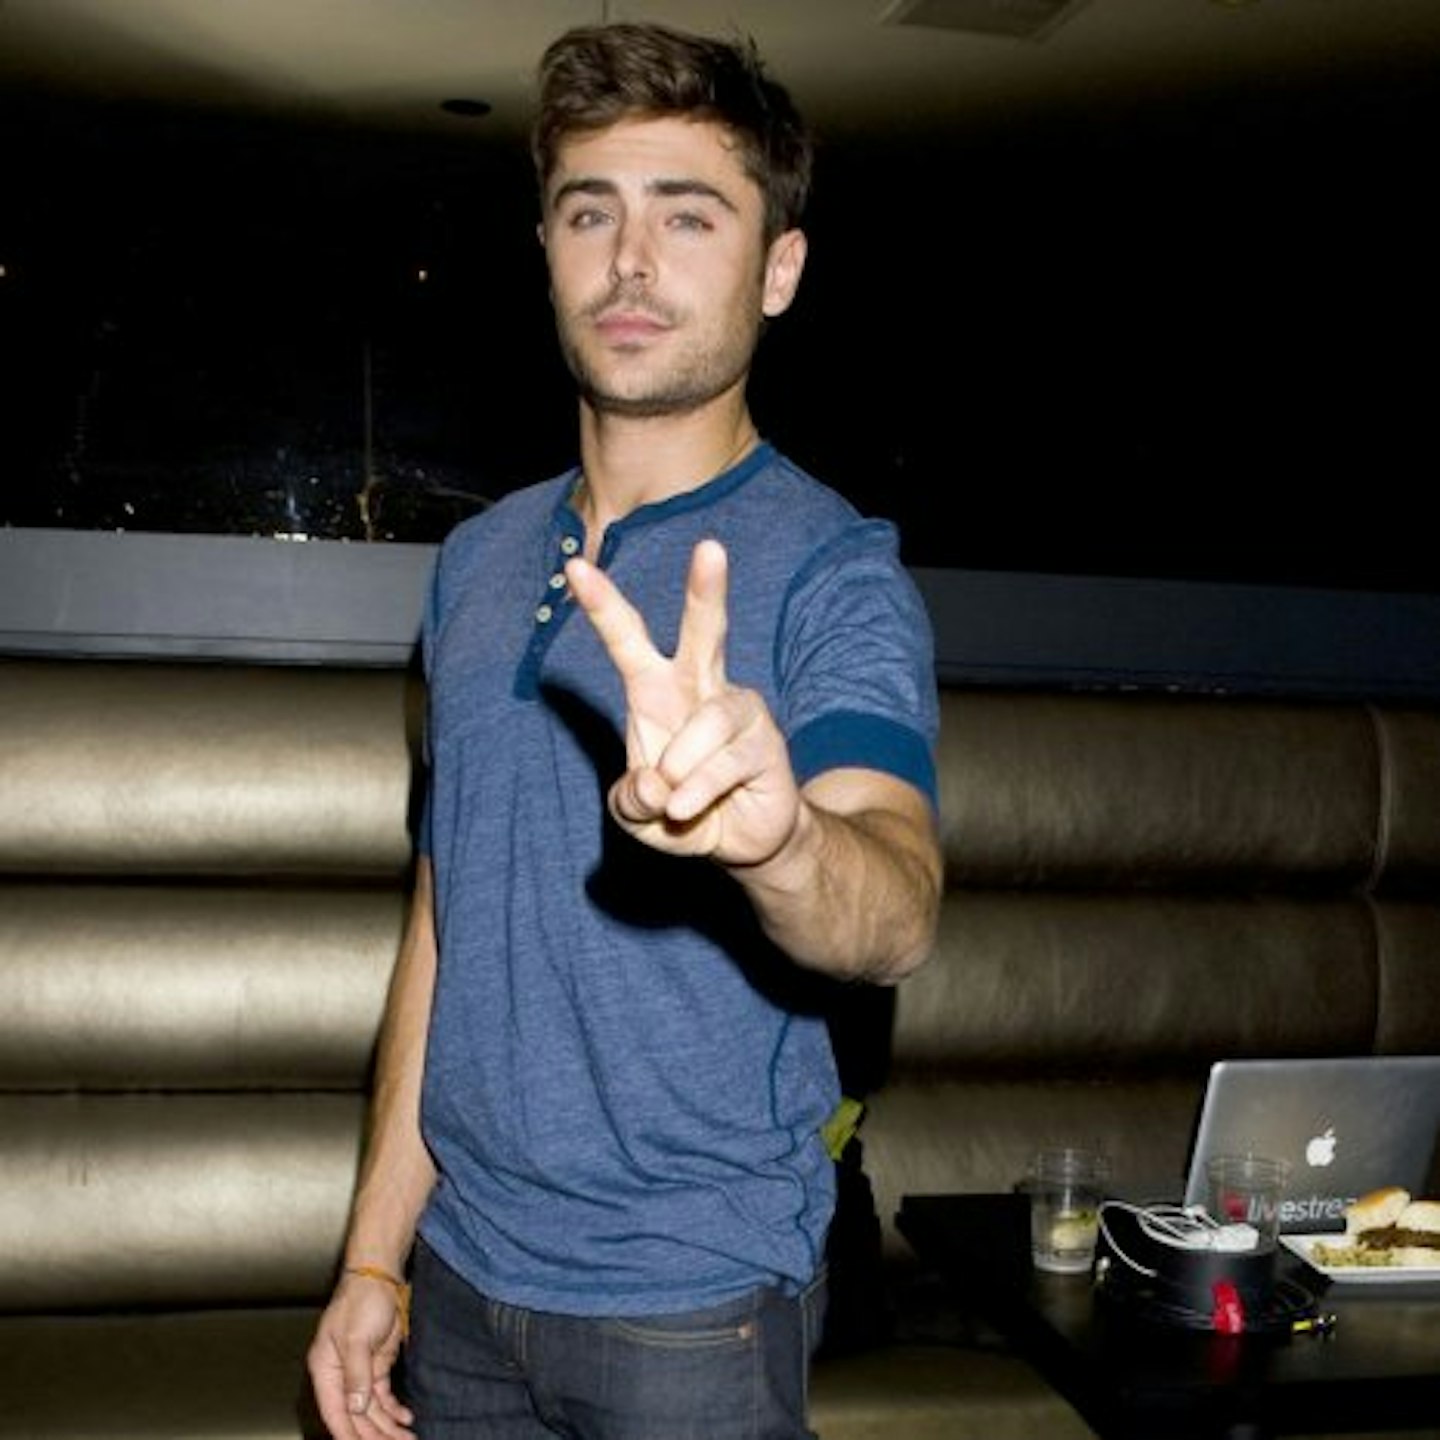 Zac used the Twitter chat to thank fans for their support during his stint in rehab for drug addiction